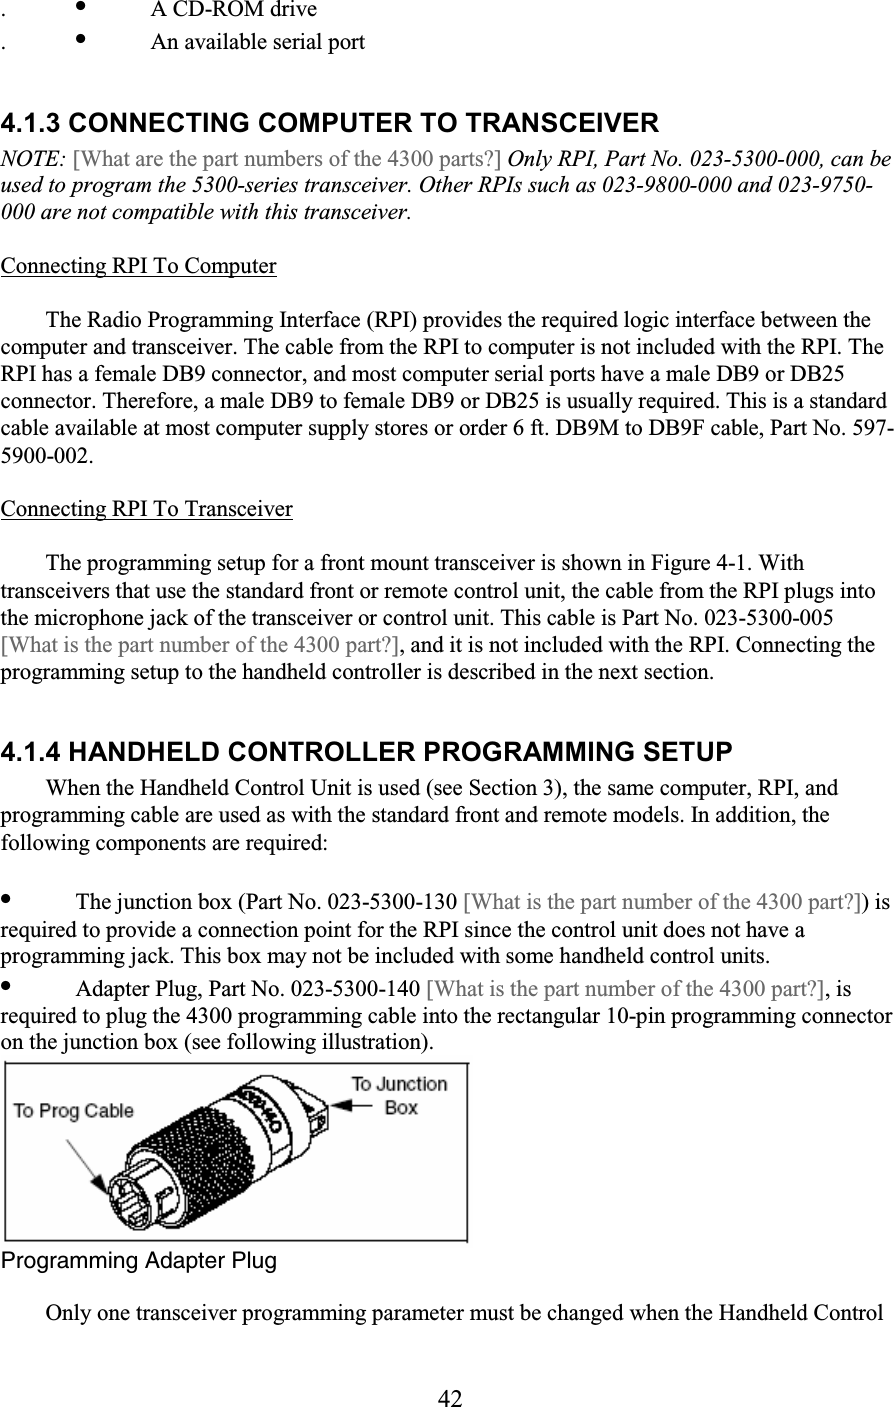 42 . •  A CD-ROM drive  . •  An available serial port   4.1.3 CONNECTING COMPUTER TO TRANSCEIVER  NOTE: [What are the part numbers of the 4300 parts?] Only RPI, Part No. 023-5300-000, can be used to program the 5300-series transceiver. Other RPIs such as 023-9800-000 and 023-9750-000 are not compatible with this transceiver.  Connecting RPI To Computer  The Radio Programming Interface (RPI) provides the required logic interface between the computer and transceiver. The cable from the RPI to computer is not included with the RPI. The RPI has a female DB9 connector, and most computer serial ports have a male DB9 or DB25 connector. Therefore, a male DB9 to female DB9 or DB25 is usually required. This is a standard cable available at most computer supply stores or order 6 ft. DB9M to DB9F cable, Part No. 597-5900-002.  Connecting RPI To Transceiver  The programming setup for a front mount transceiver is shown in Figure 4-1. With transceivers that use the standard front or remote control unit, the cable from the RPI plugs into the microphone jack of the transceiver or control unit. This cable is Part No. 023-5300-005  [What is the part number of the 4300 part?], and it is not included with the RPI. Connecting the programming setup to the handheld controller is described in the next section.  4.1.4 HANDHELD CONTROLLER PROGRAMMING SETUP  When the Handheld Control Unit is used (see Section 3), the same computer, RPI, and programming cable are used as with the standard front and remote models. In addition, the following components are required:  •  The junction box (Part No. 023-5300-130 [What is the part number of the 4300 part?]) is required to provide a connection point for the RPI since the control unit does not have a programming jack. This box may not be included with some handheld control units.  •  Adapter Plug, Part No. 023-5300-140 [What is the part number of the 4300 part?], is required to plug the 4300 programming cable into the rectangular 10-pin programming connector on the junction box (see following illustration).   Programming Adapter Plug  Only one transceiver programming parameter must be changed when the Handheld Control 